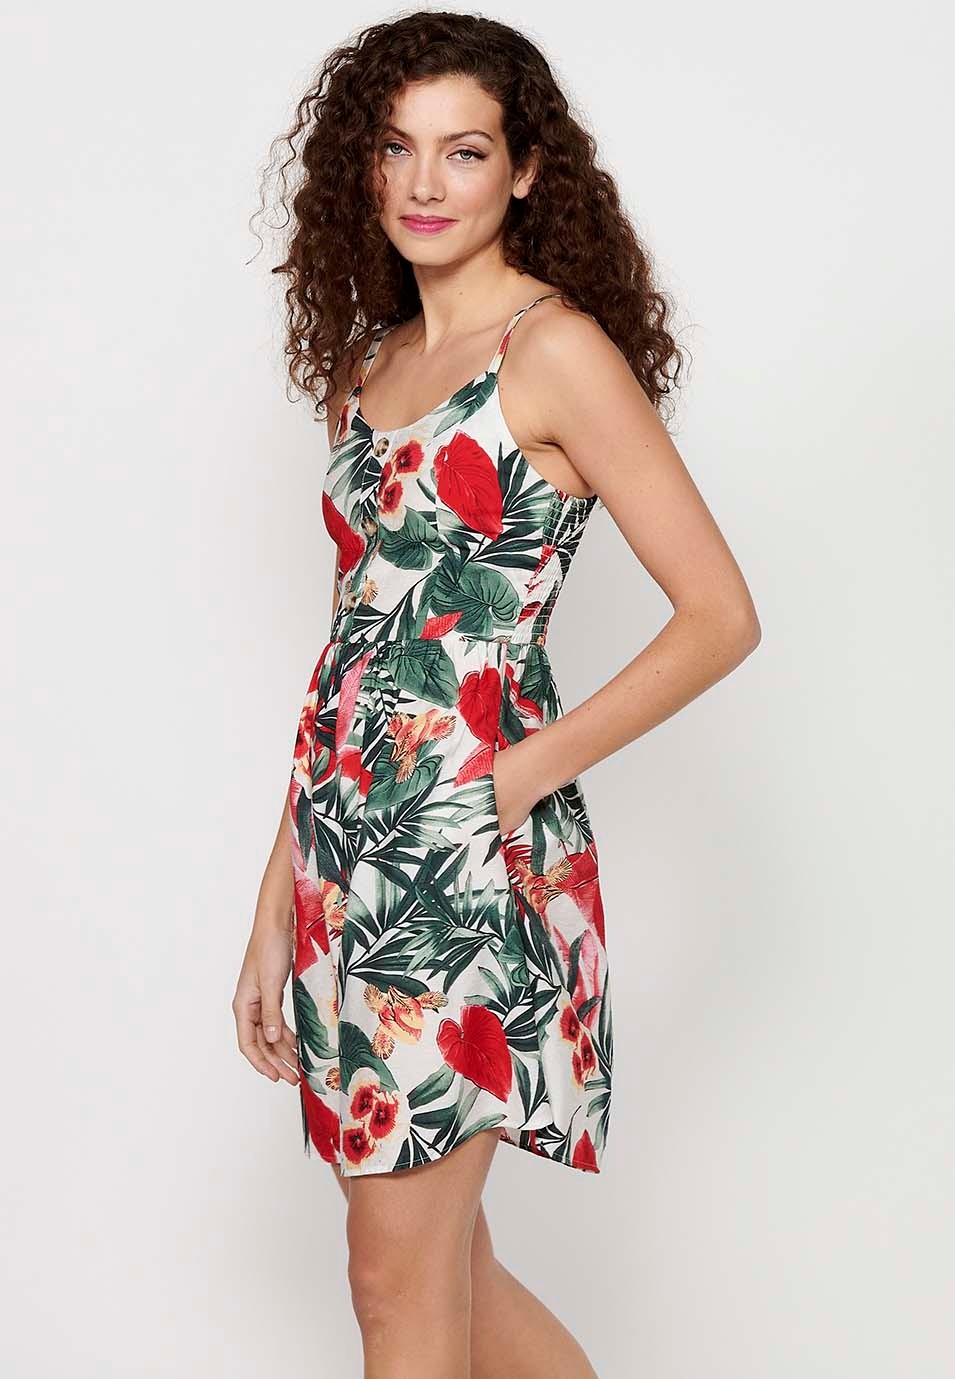 Women's Tropical Floral Print V-Neck Button Front Strap Dress with Rubberized Back Multicolor 6